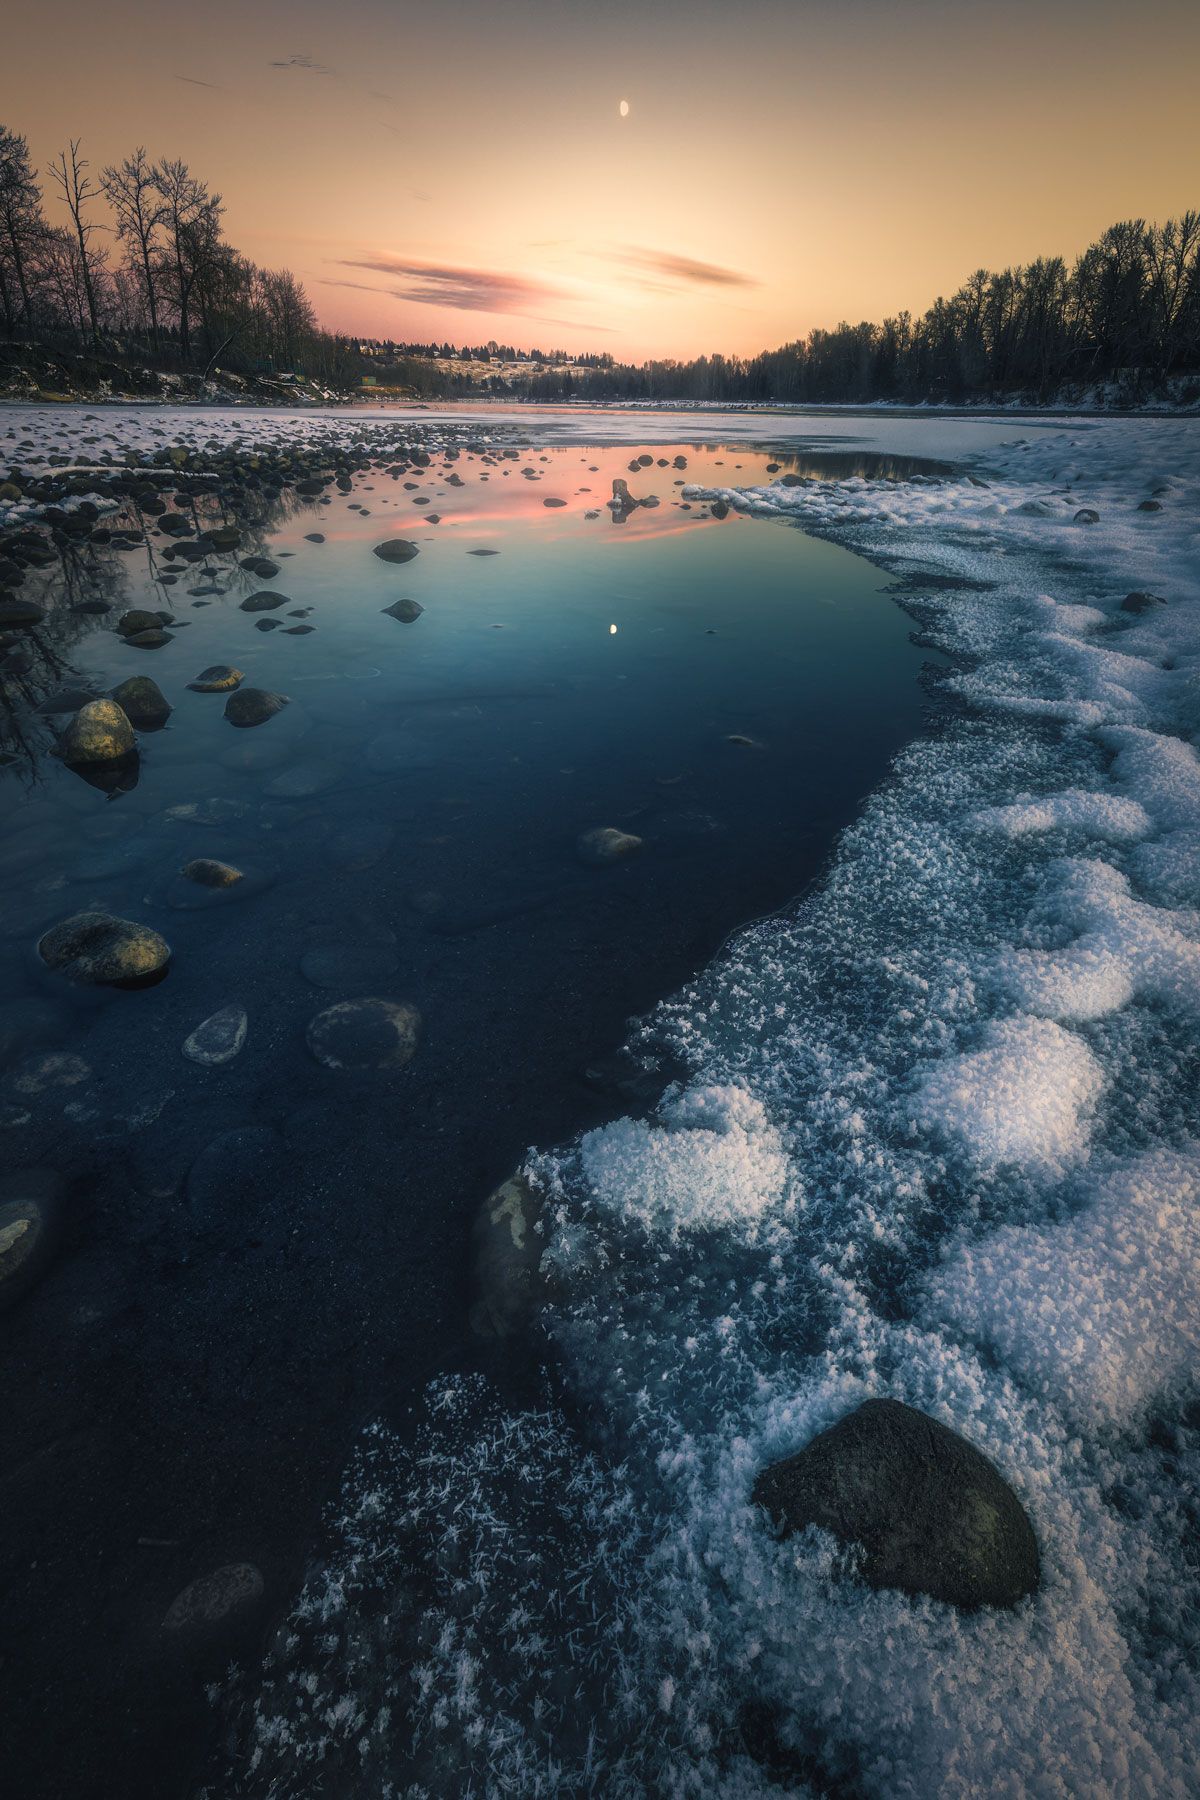 landscape, dark, winter, snow, cold, ice, water, river, lake, mirror, reflection, sunset, outdoor, nature, stone, Zhao Huapu